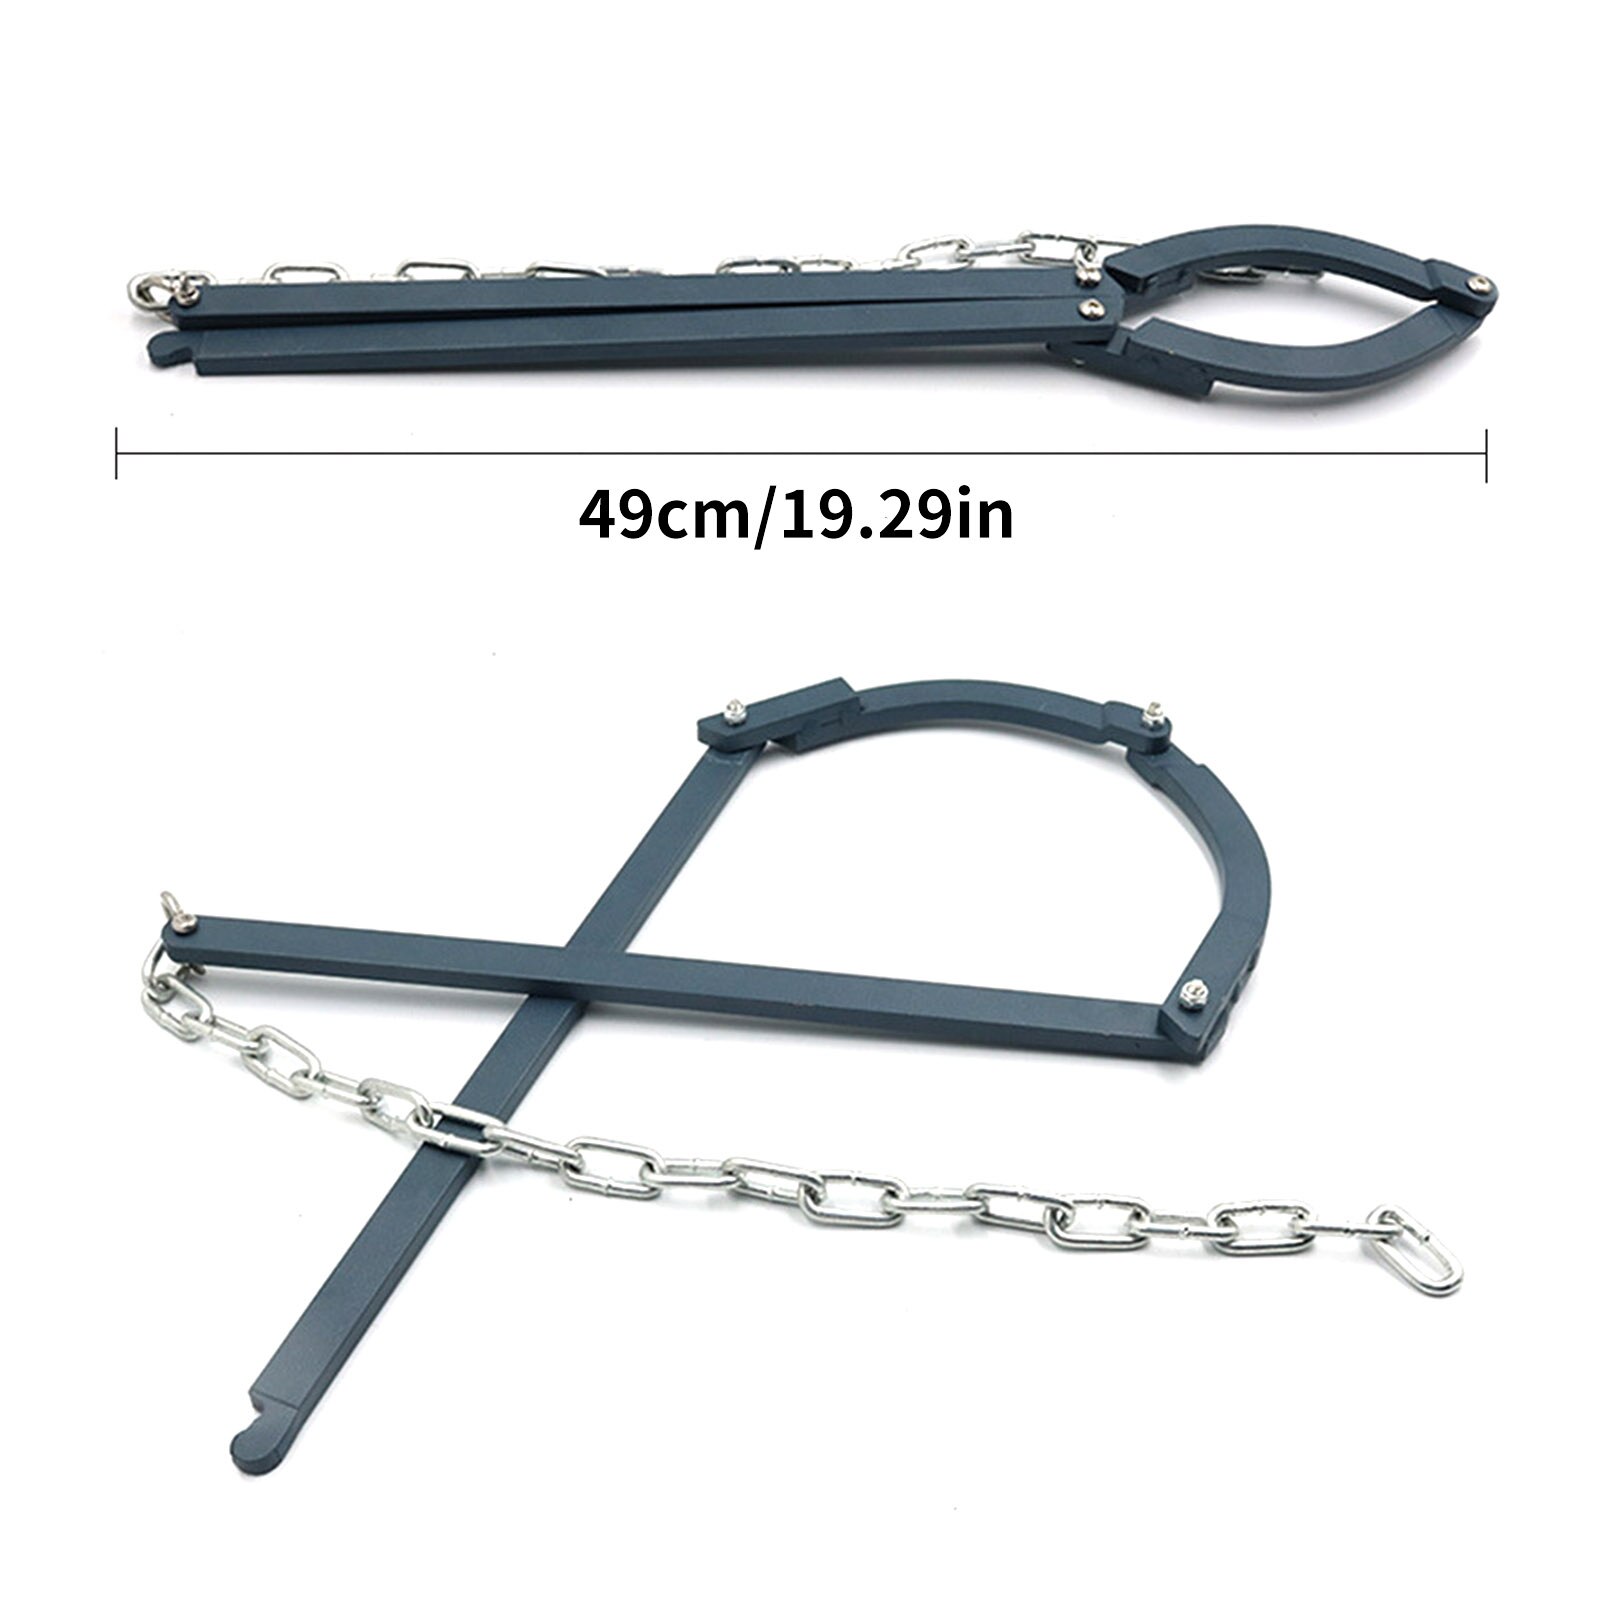 Garden Fence Fixer Chain Wire Barbed Fence Repair Tool Farm Fence Stretcher Horse Fence Tensioner Puller Manual Repair Devi